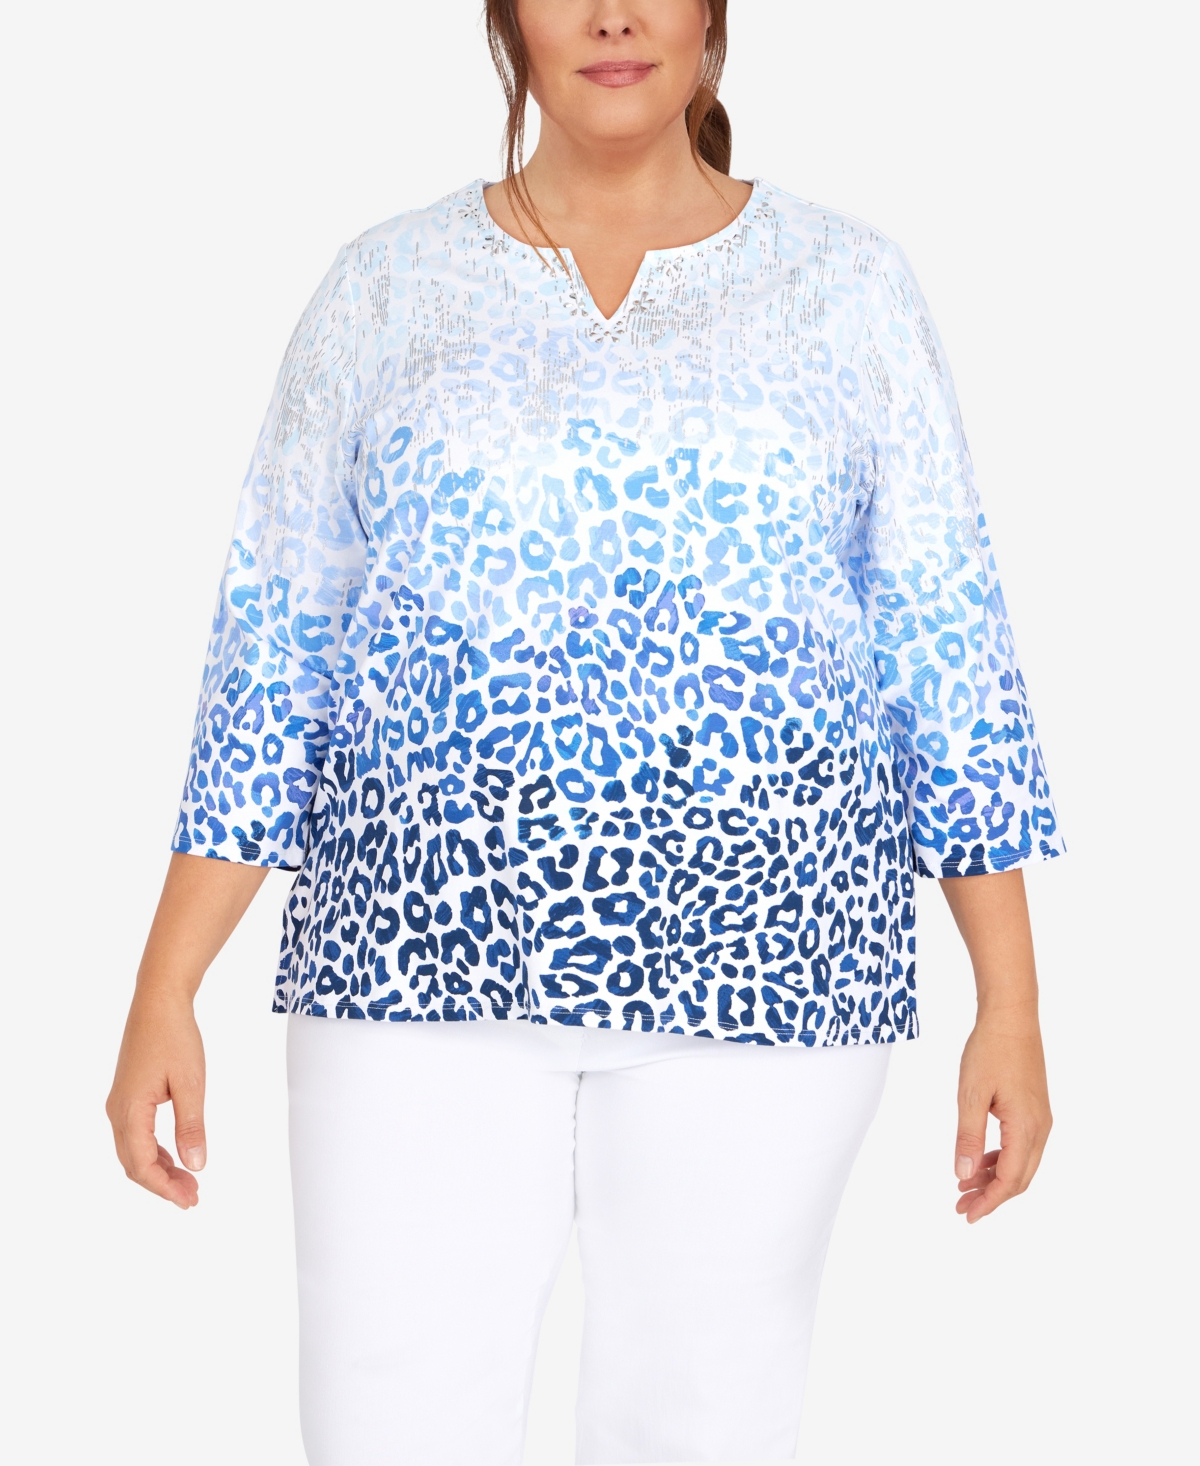 ALFRED DUNNER PLUS SIZE CLASSIC SPLIT NECK ANIMAL OMBRE 3/4 SLEEVE TOP